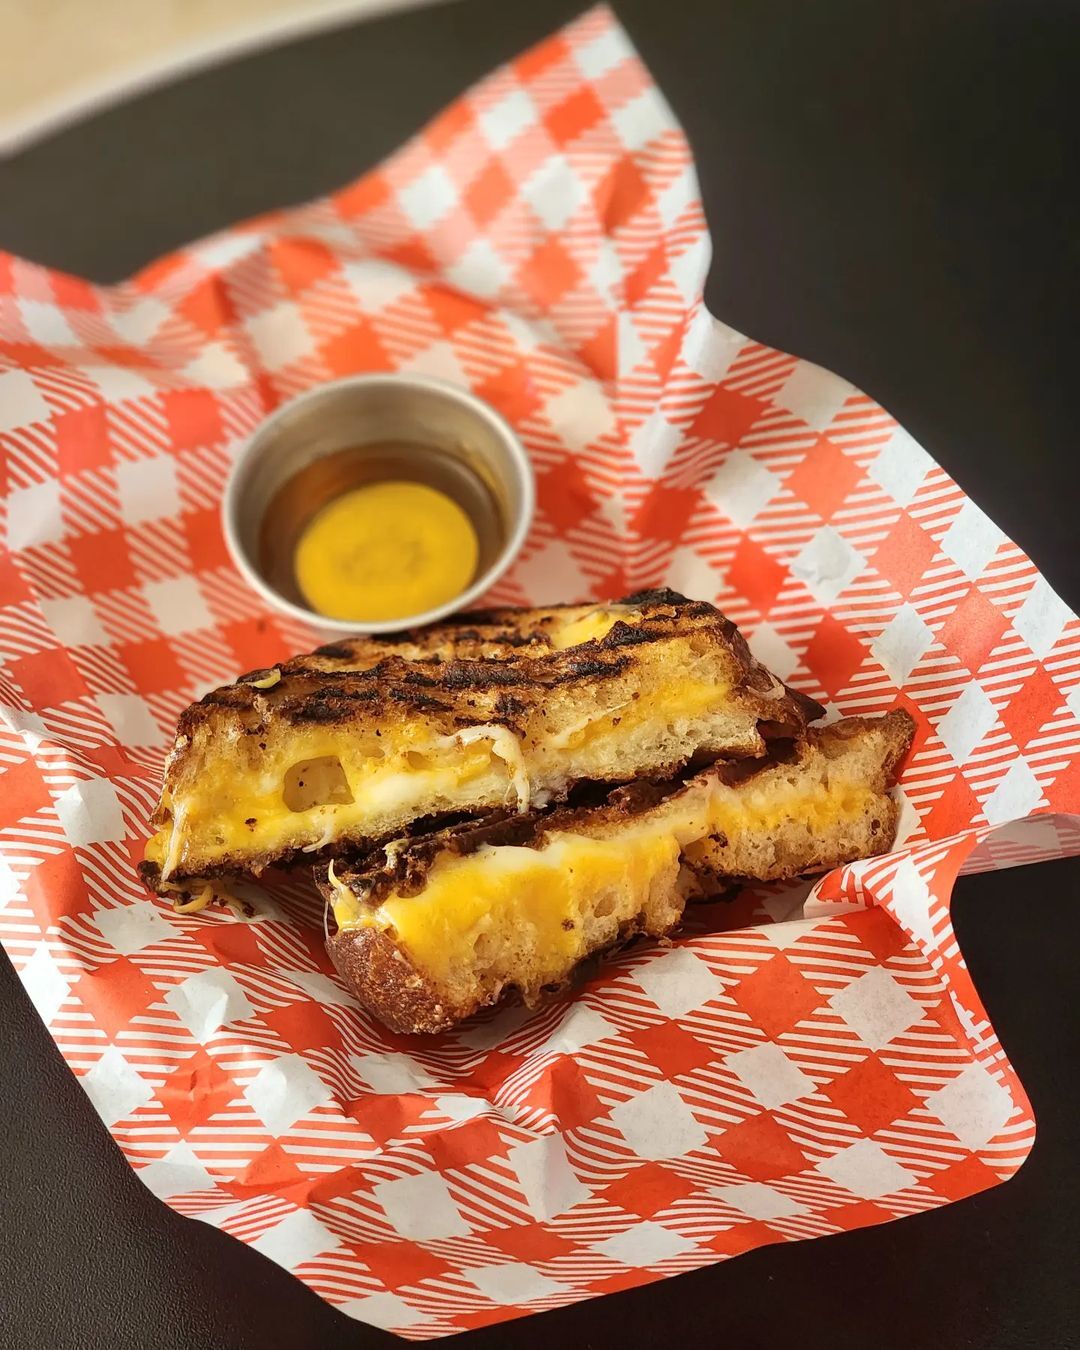 Rocket's Room Cafe - grilled cheese